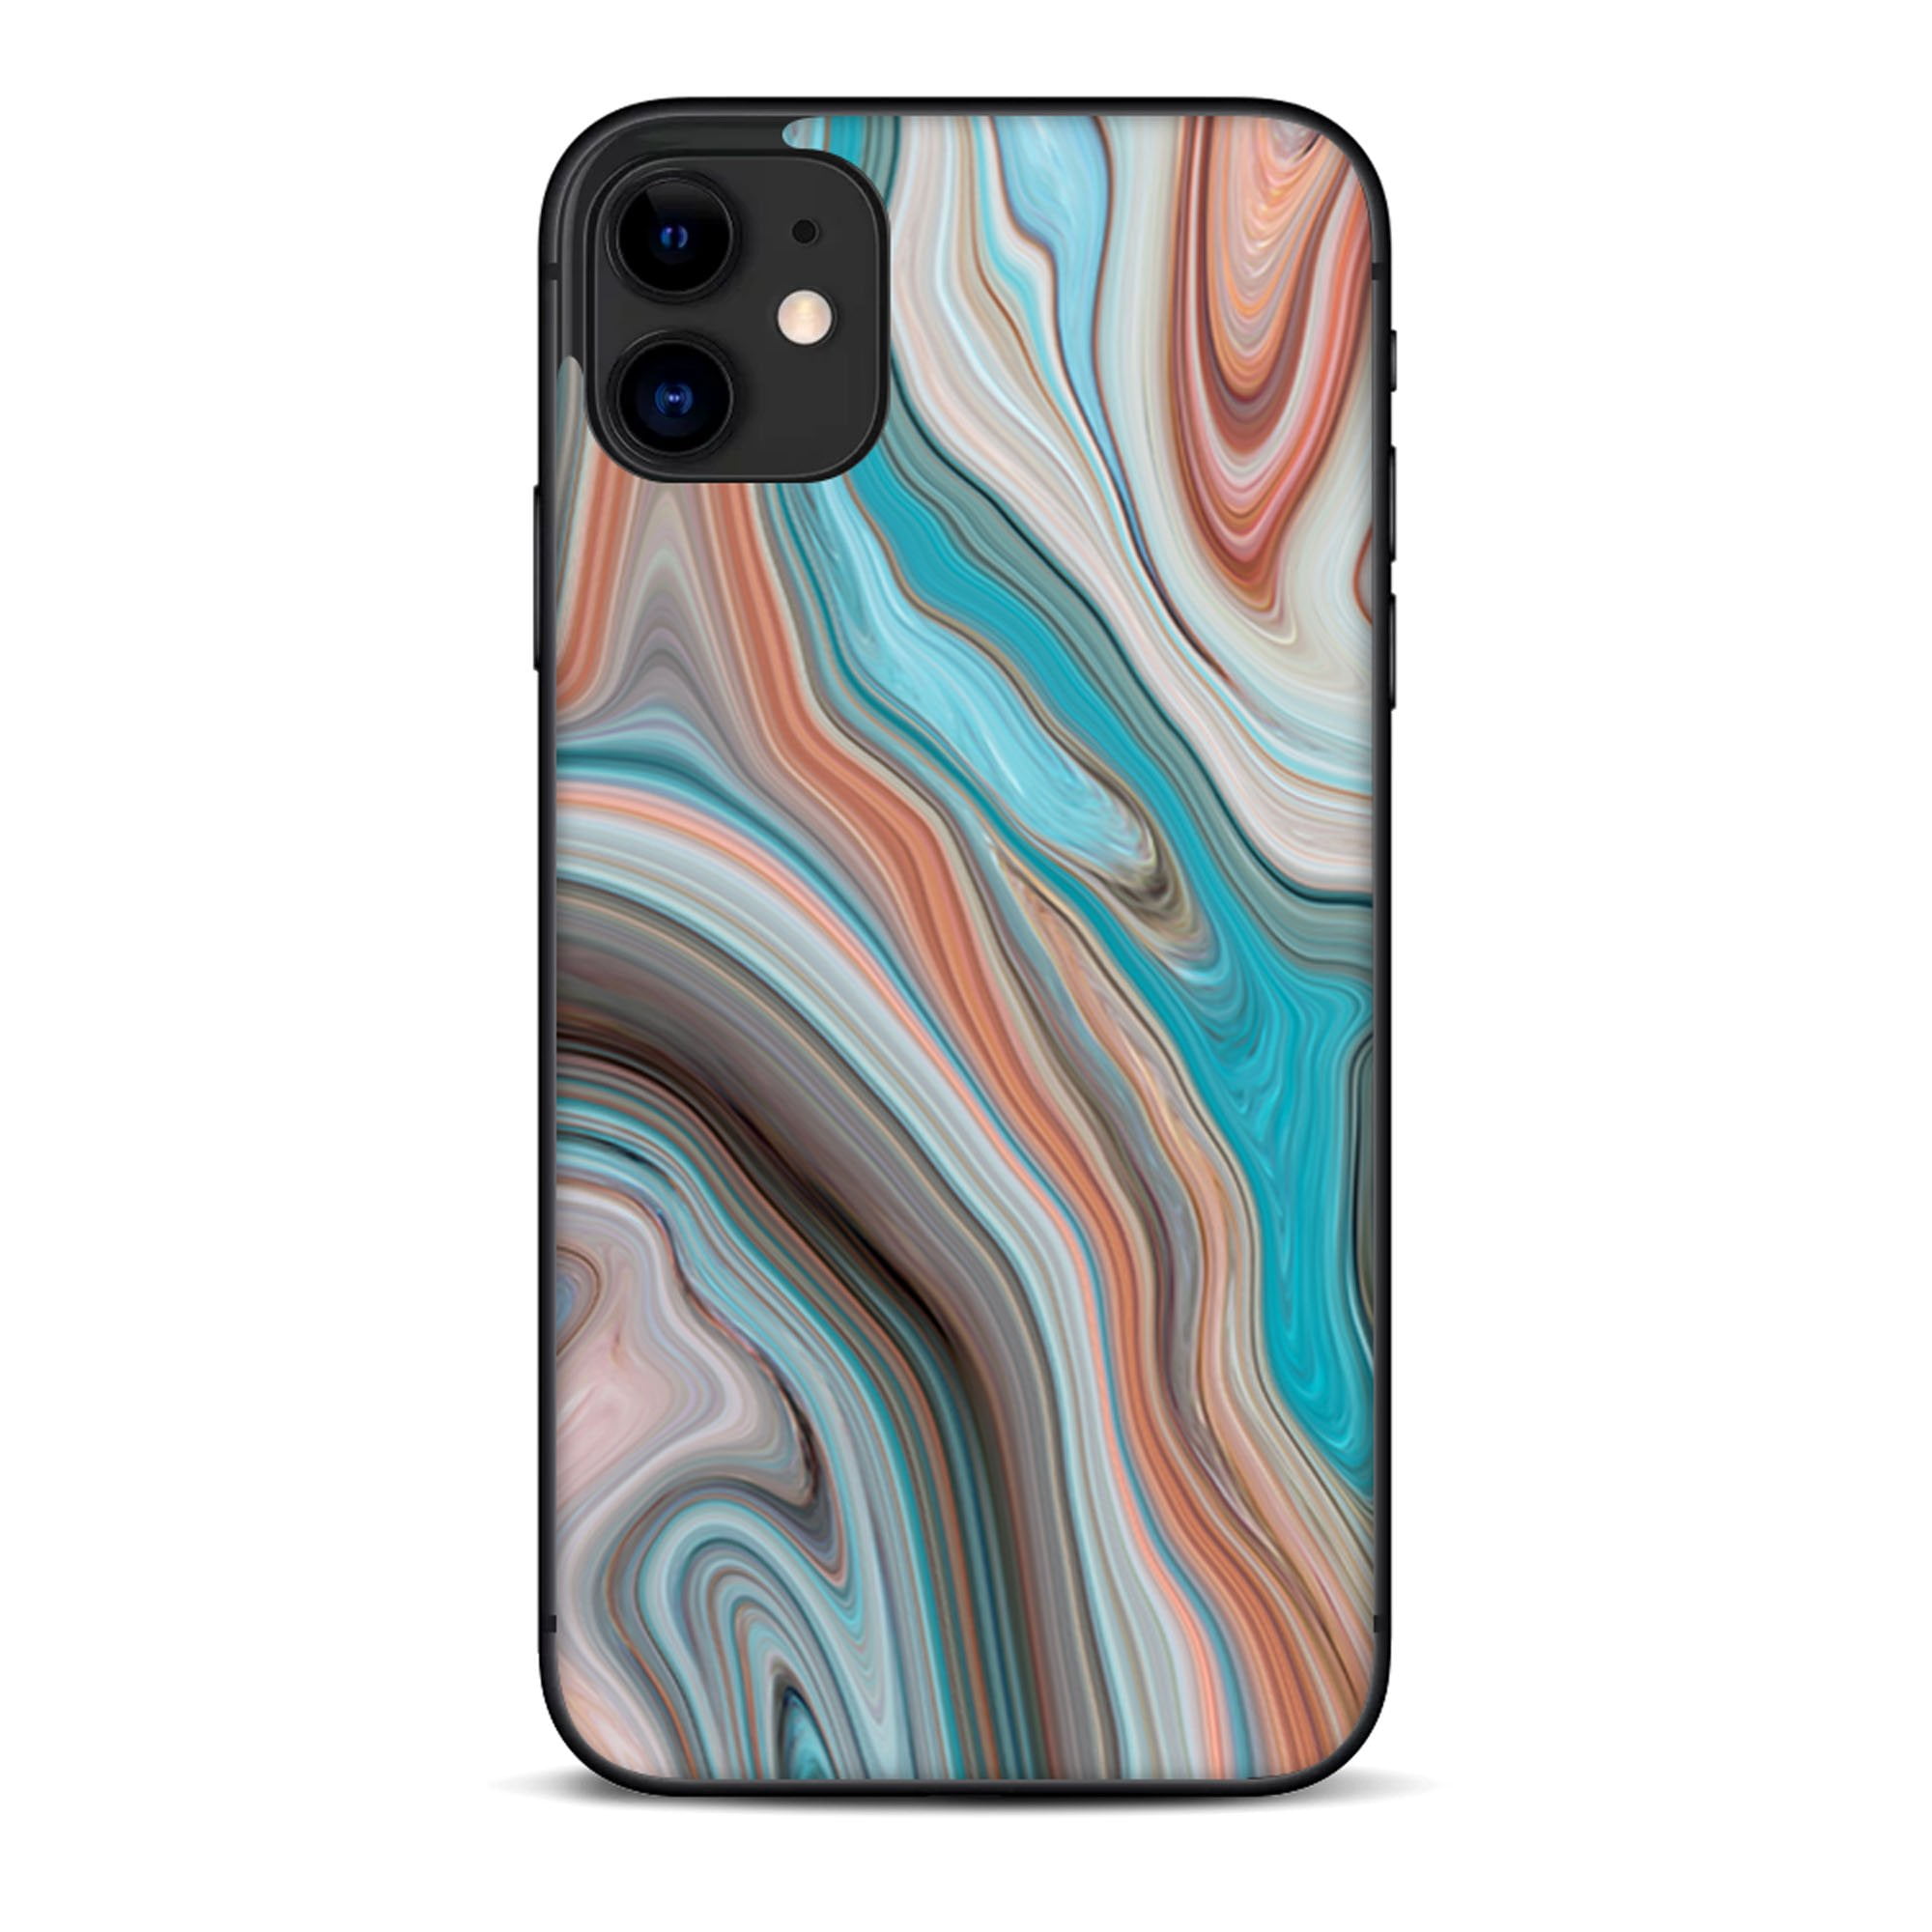 Skin for Apple iPhone 11 Skins Decal Vinyl Wrap Stickers Cover - Teal